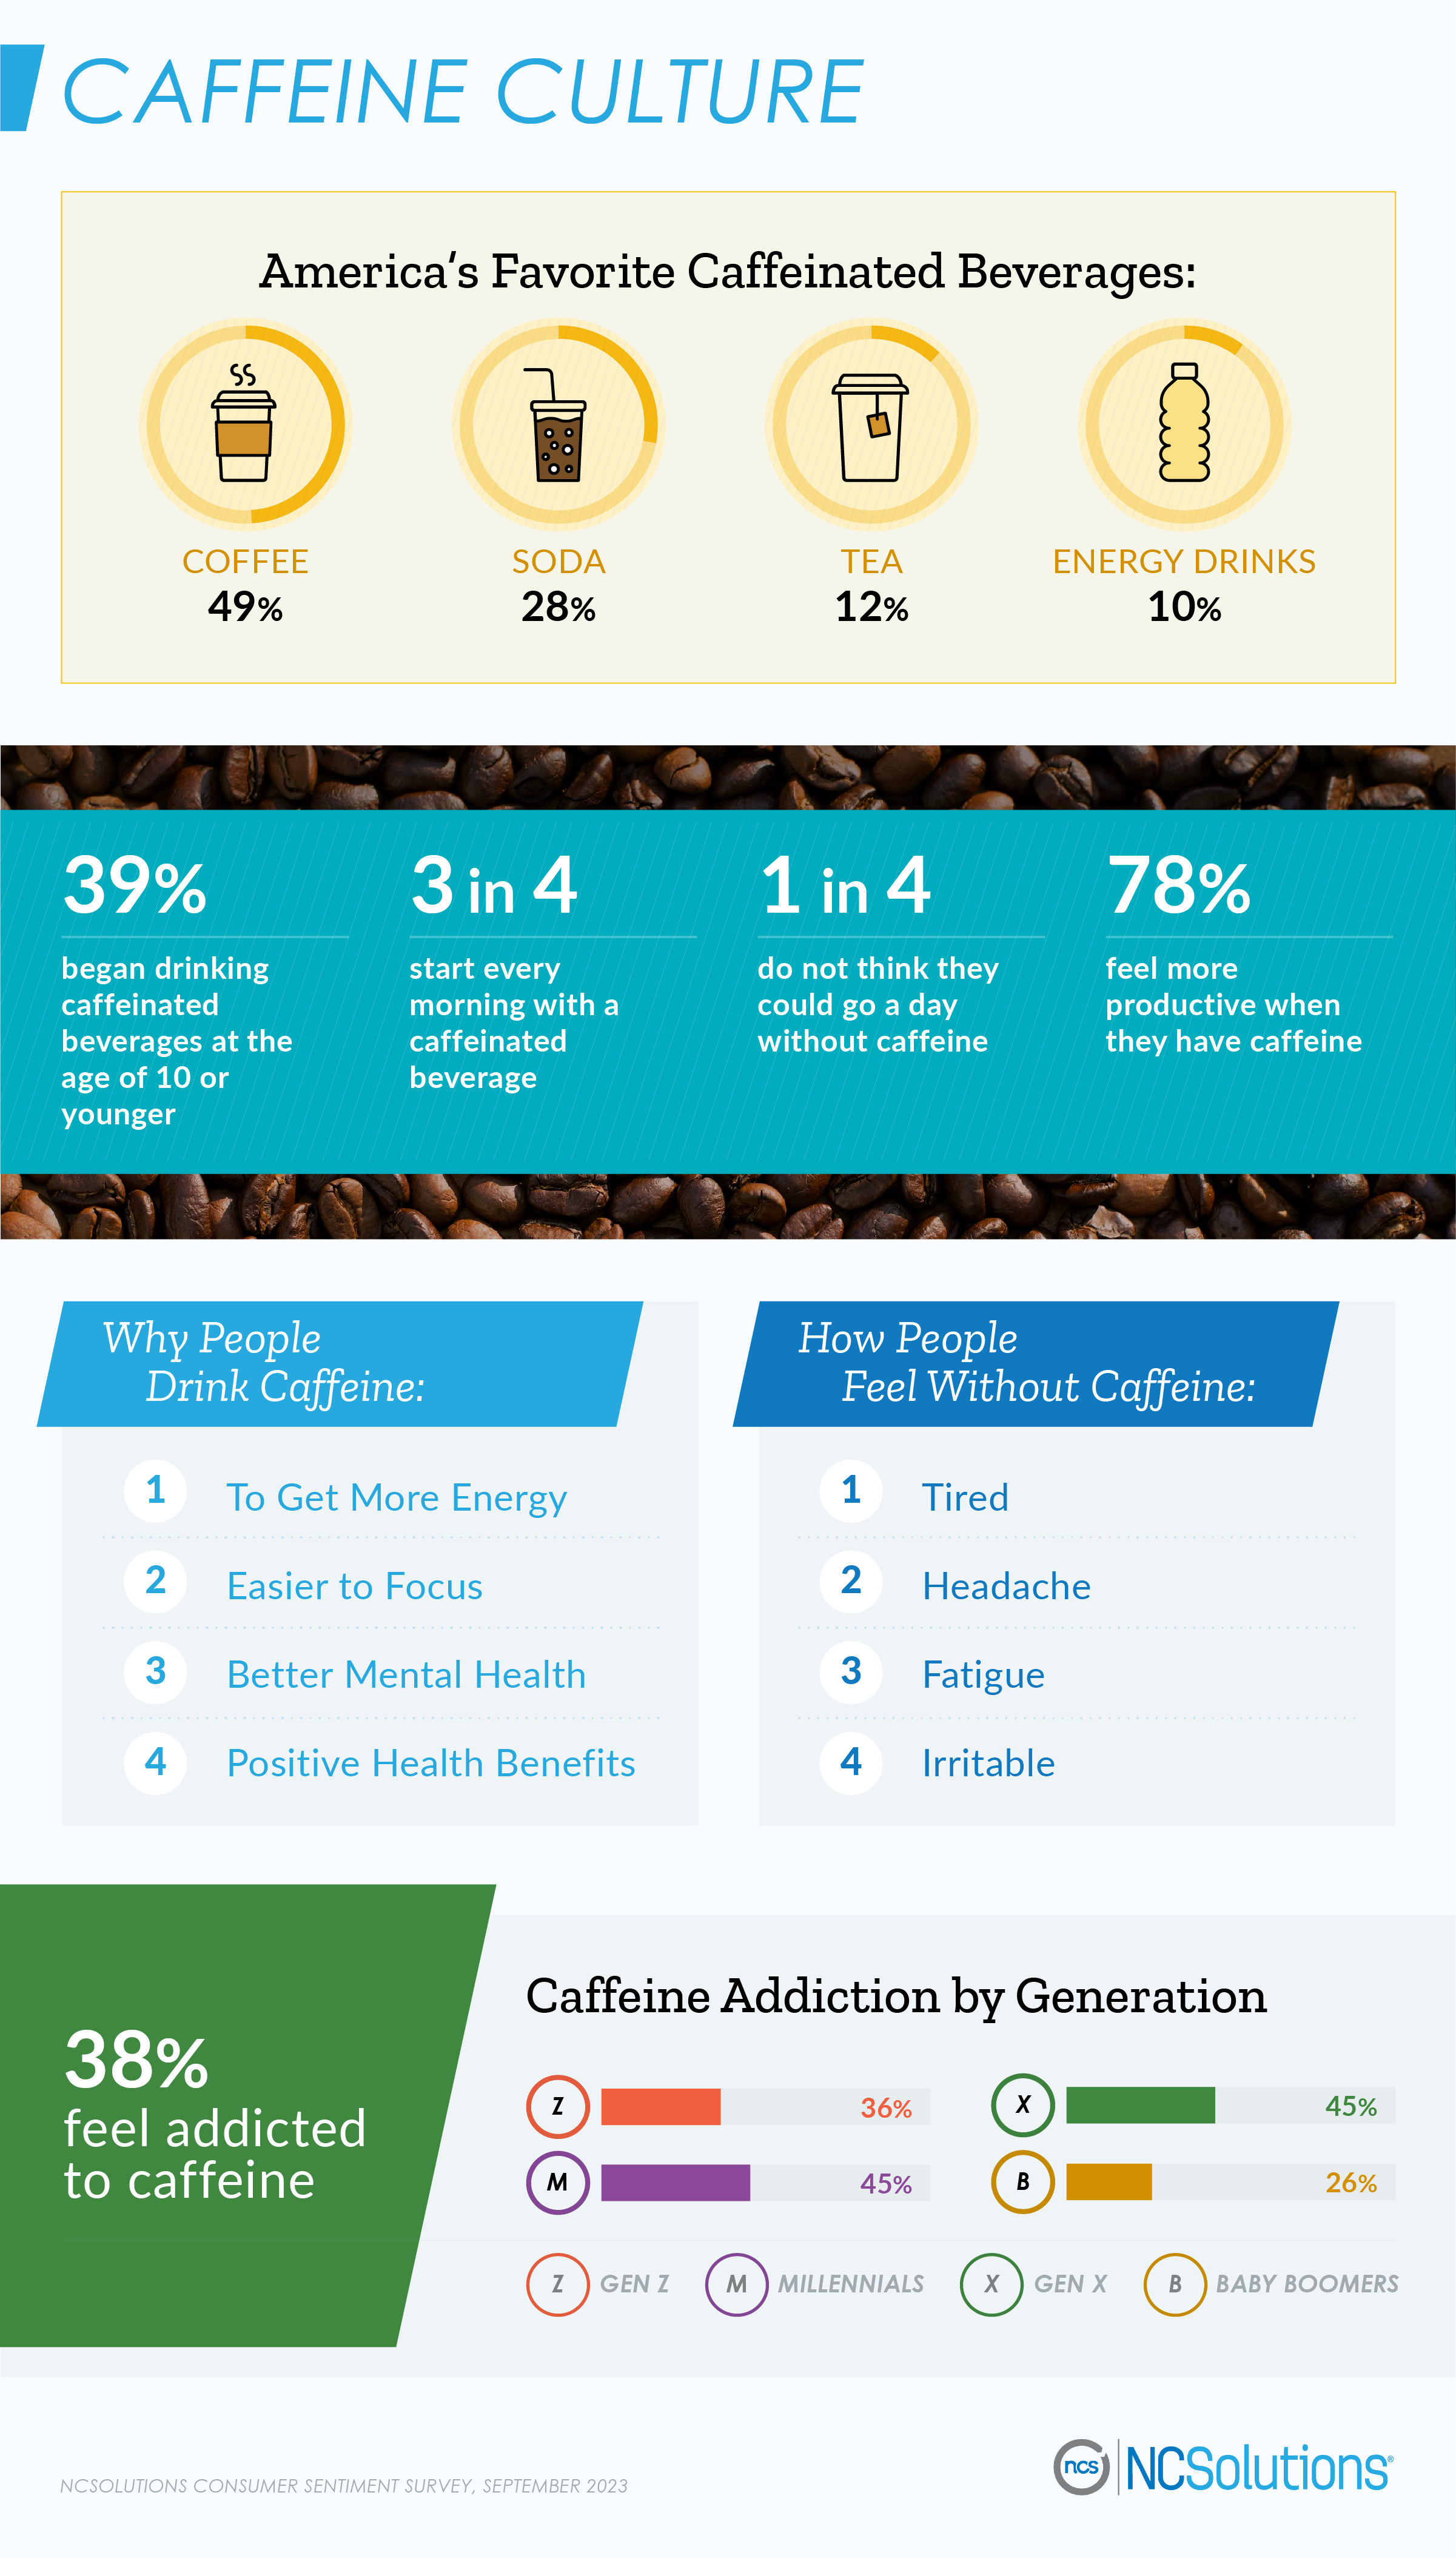  Top caffeinated beverages ranked and top reasons people drink caffeine - report from ncsolutions.com 